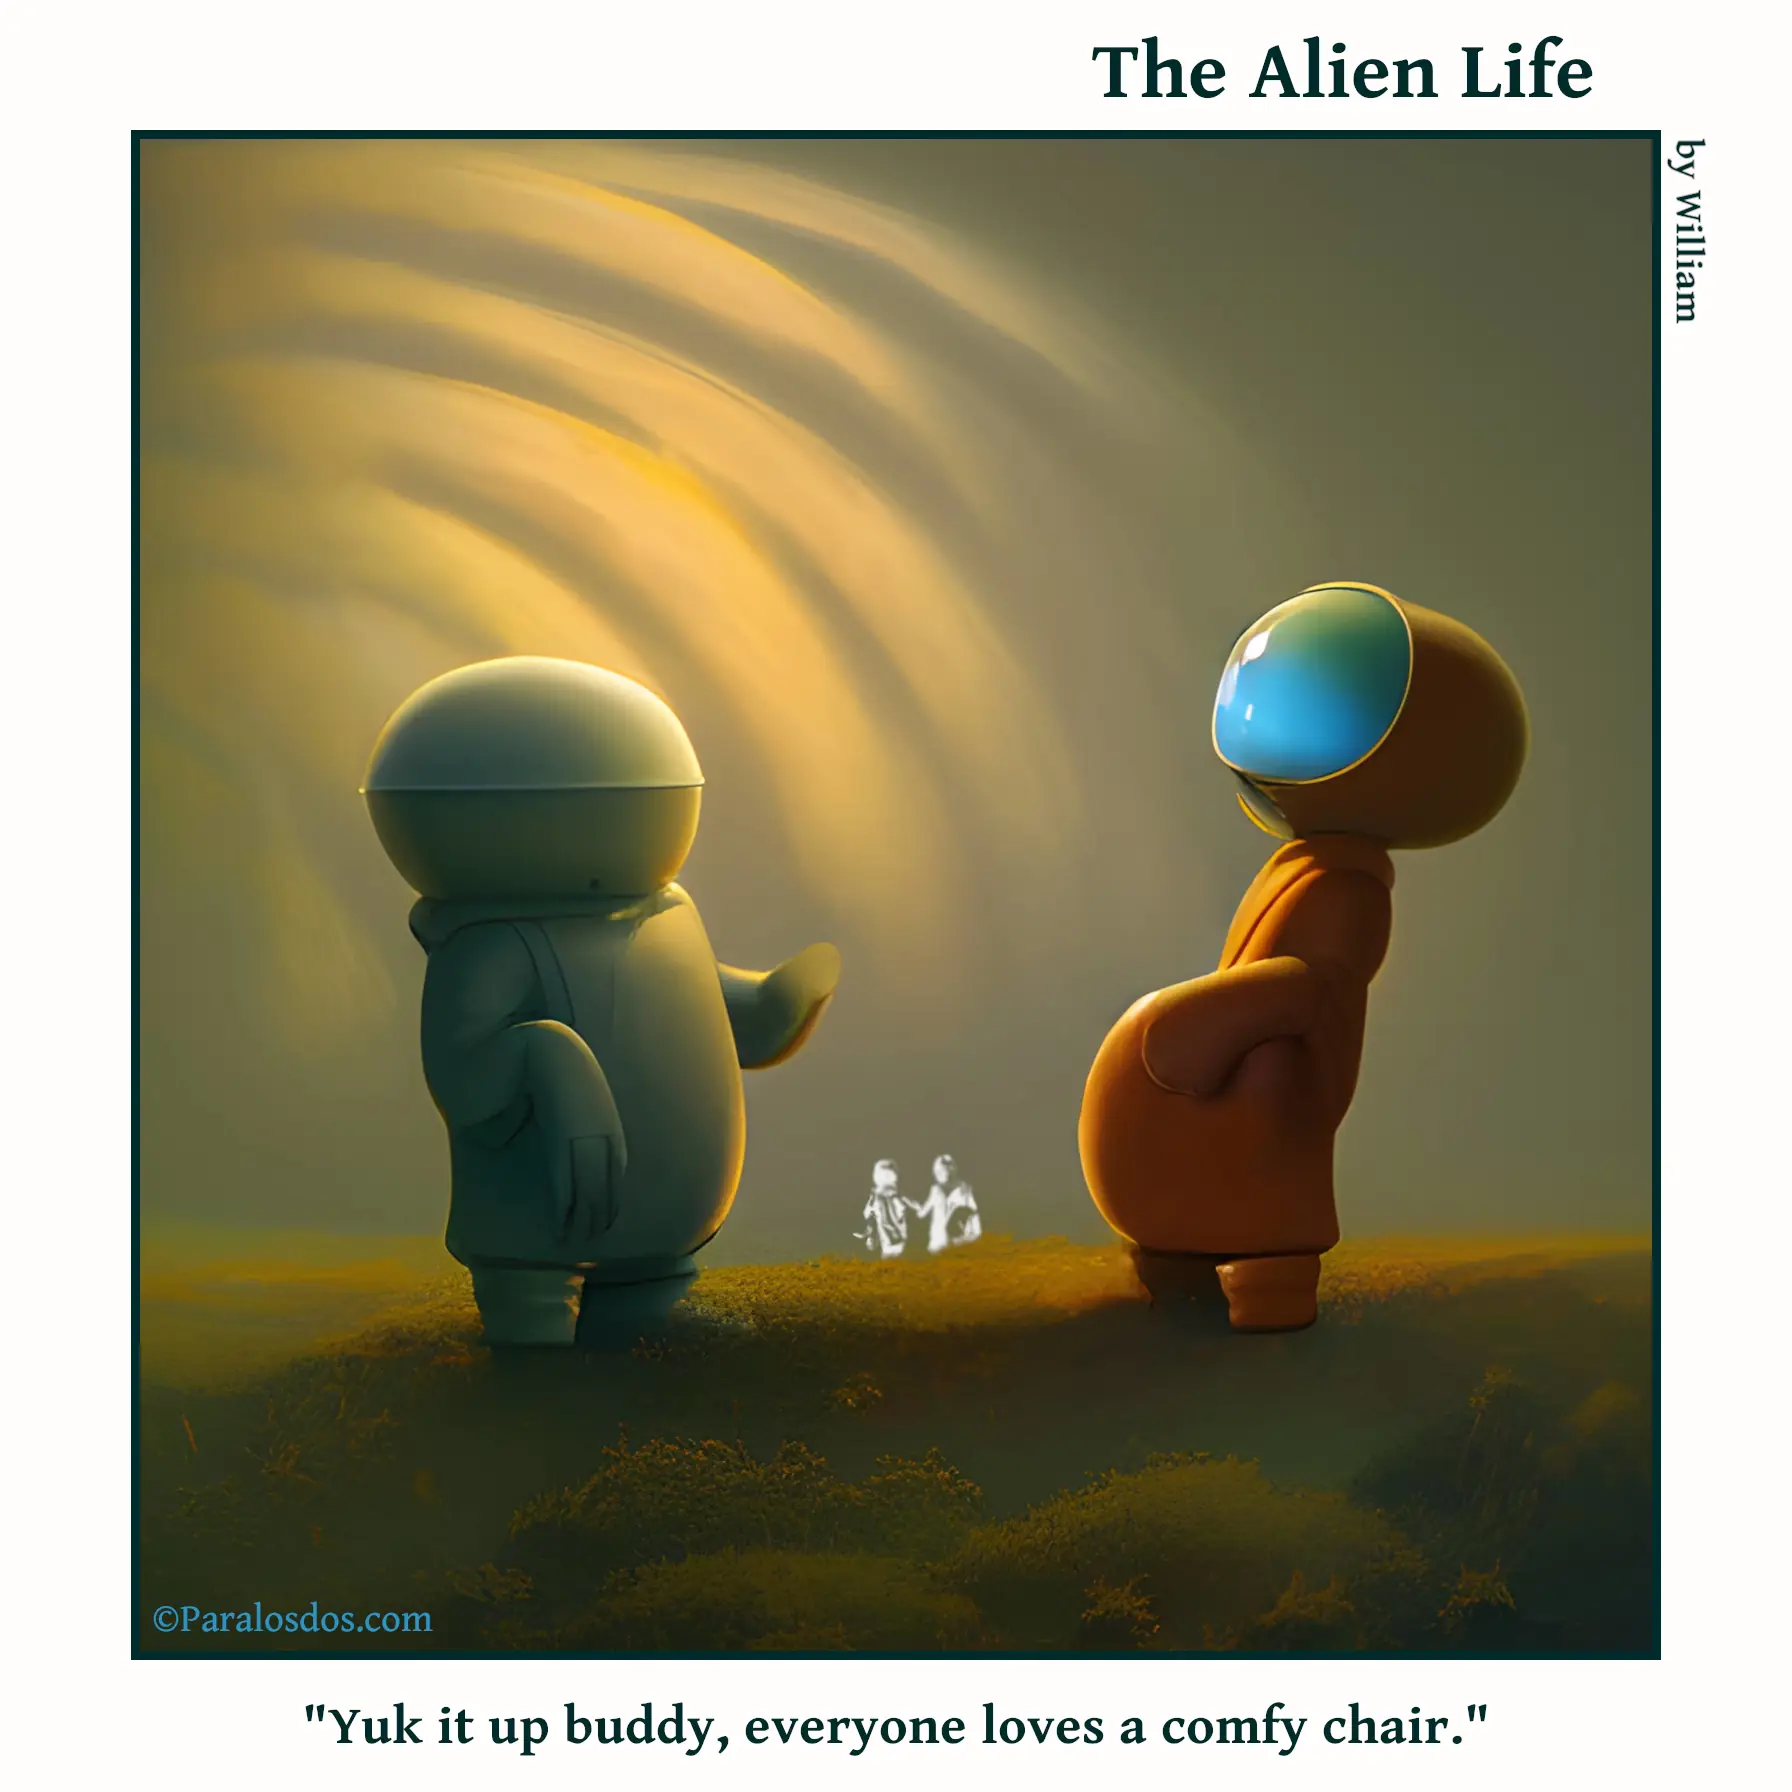 The Alien Life, one panel Comic. Two aliens are facing each other. one of them is shaped remarkably like a comfy chair. The caption reads: "Yuk it up buddy, everyone loves a comfy chair."